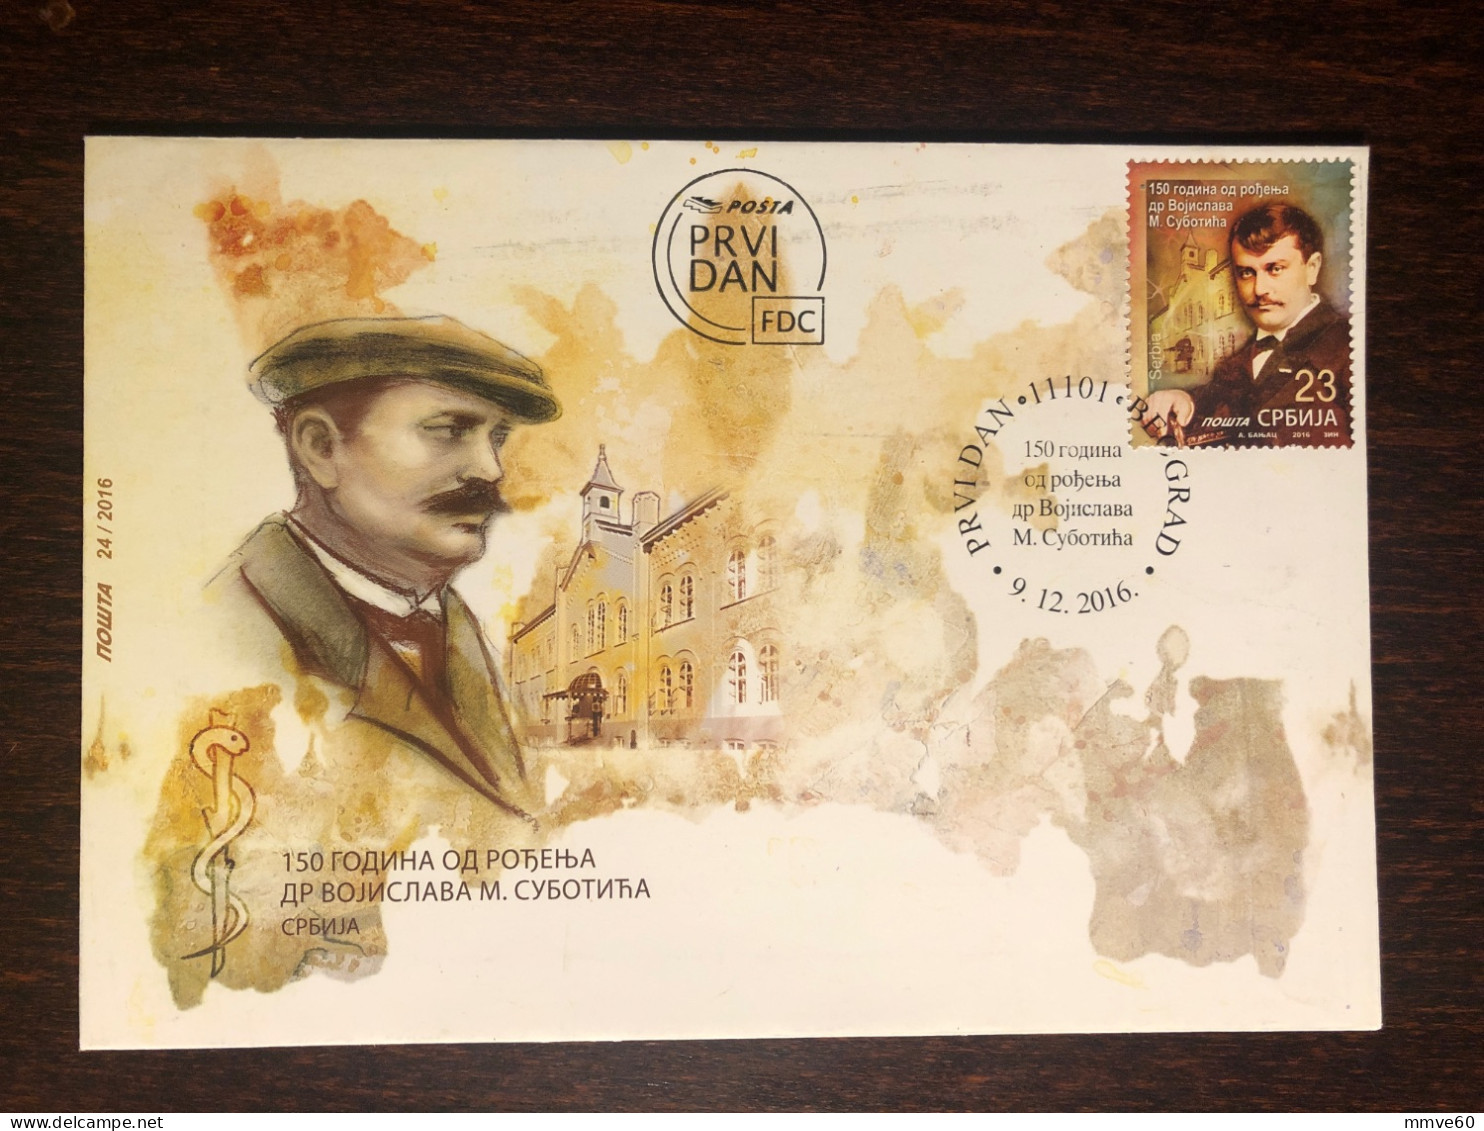 SERBIA FDC COVER 2016 YEAR DOCTOR SUBOTITSYA SURGERY HEALTH MEDICINE STAMPS - Serbia